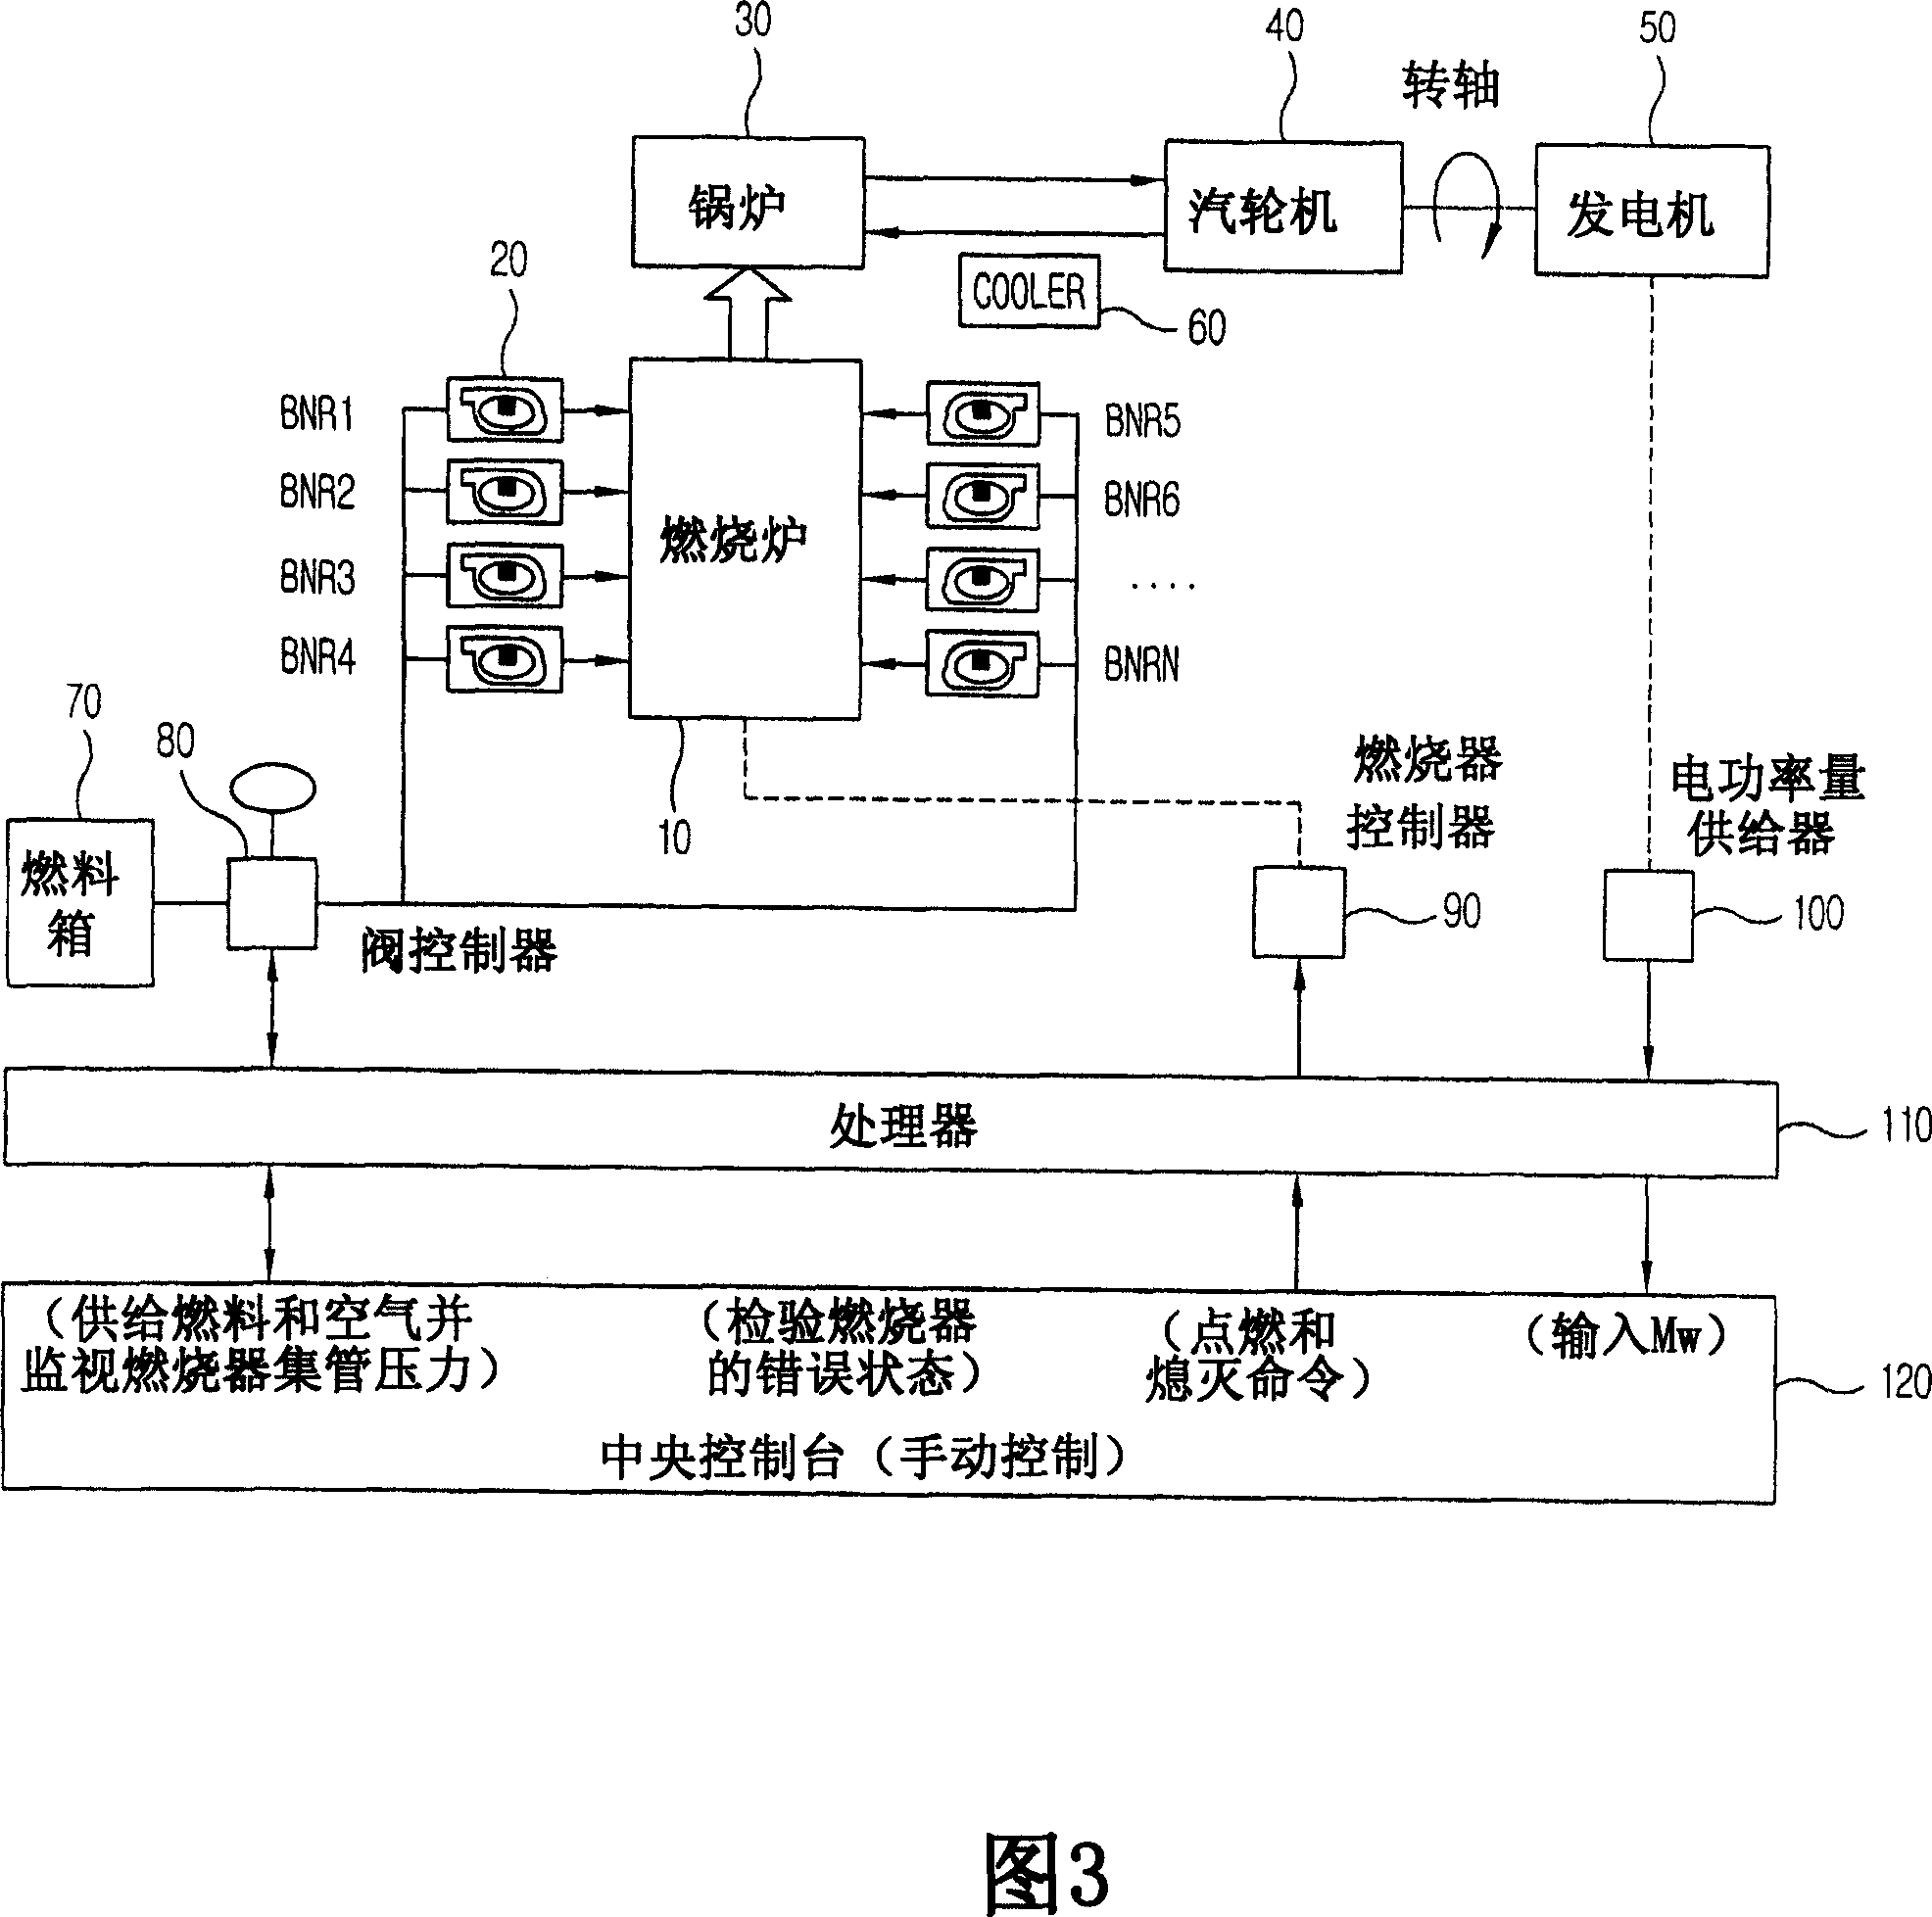 Automatic combustor control system for steam power generation station